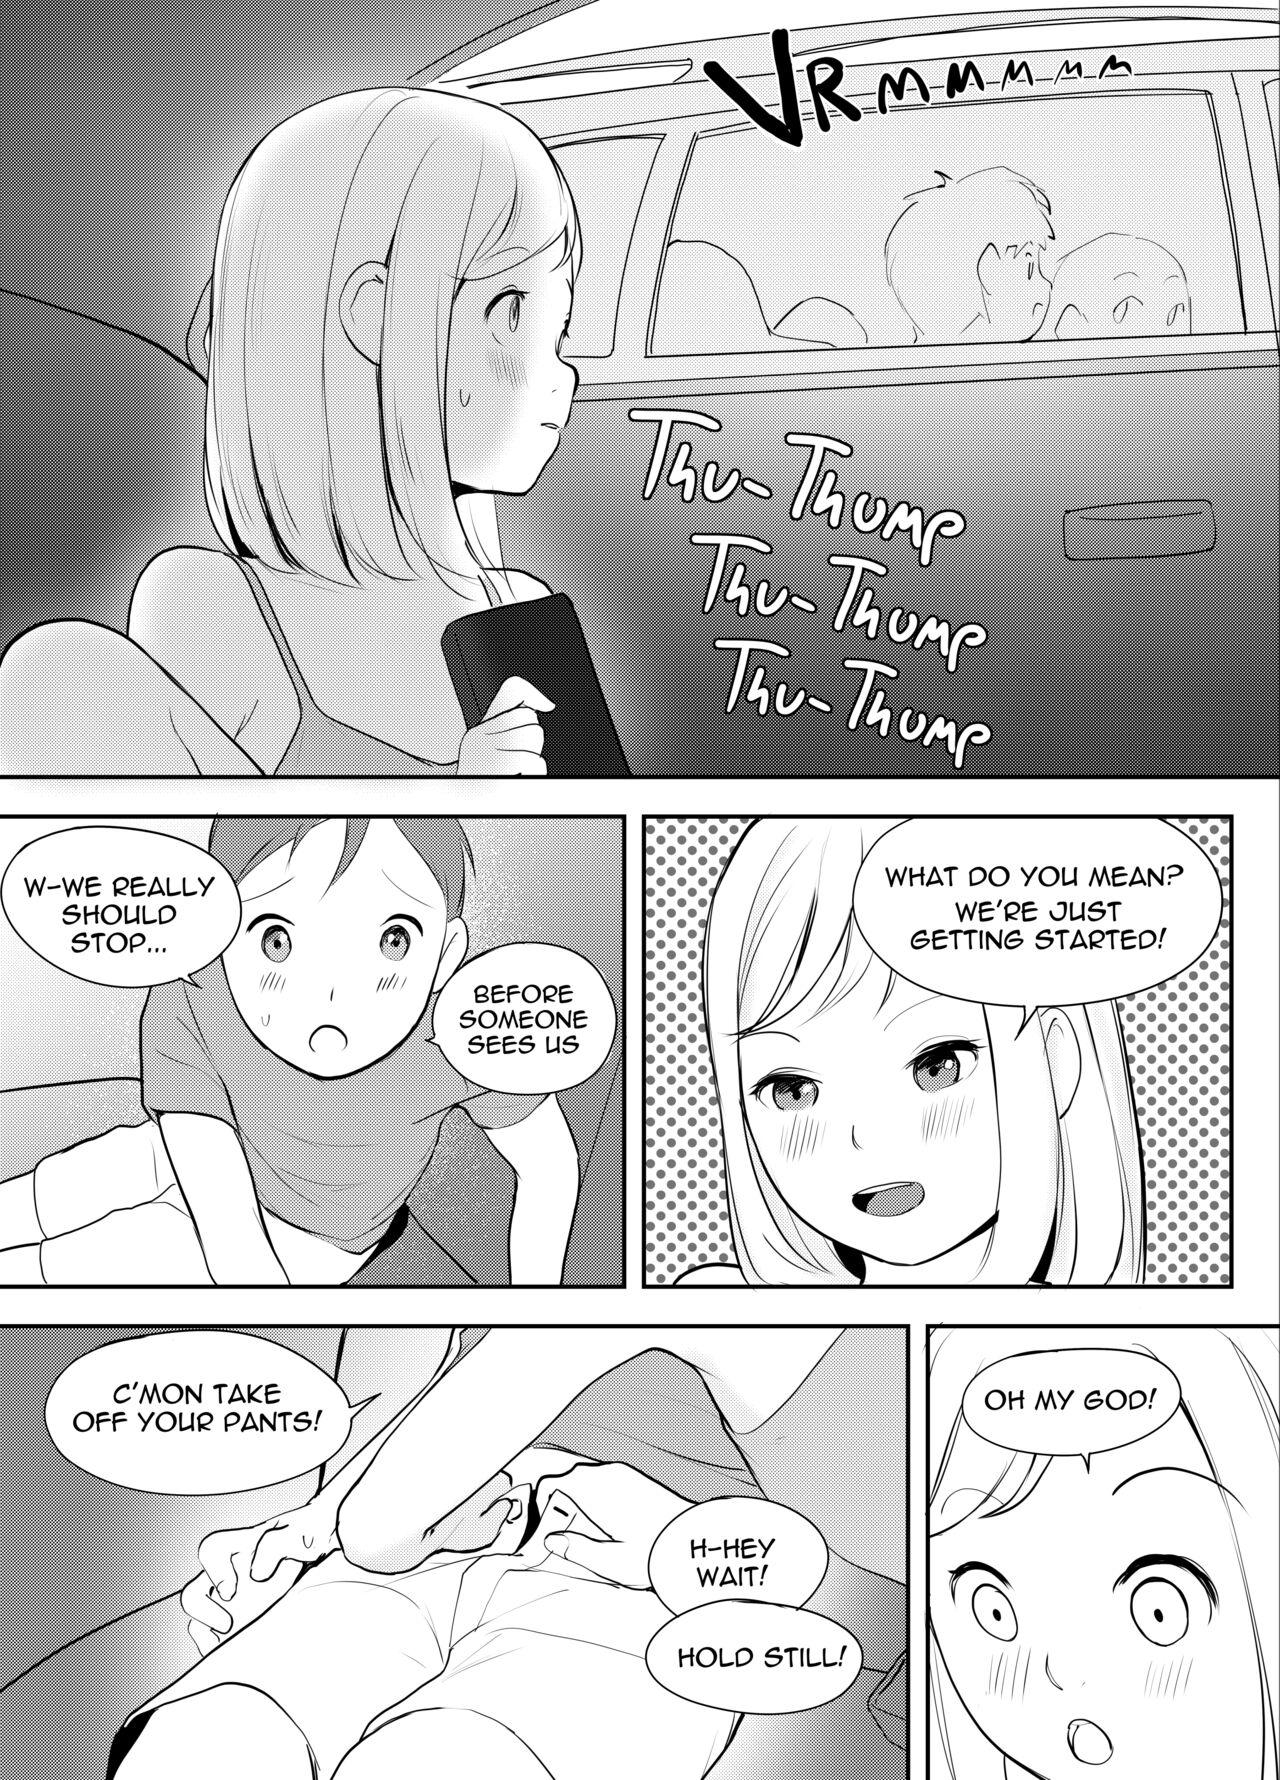 Shorts Passing the Time - Original Best Blow Jobs Ever - Page 8